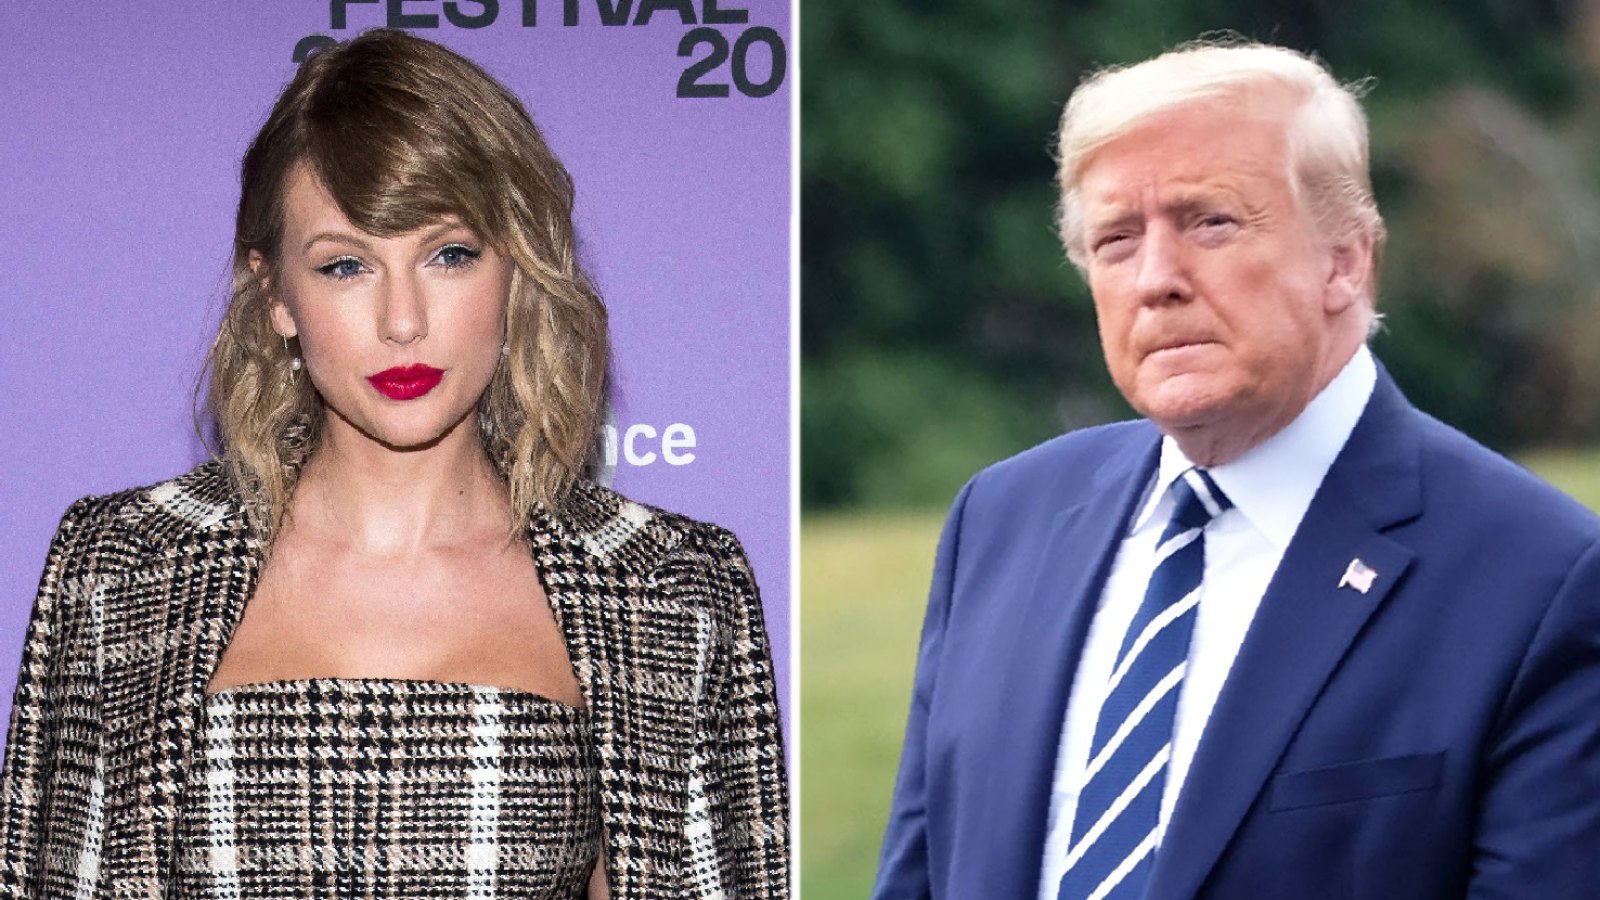 Taylor Swift’s Donald Trump Tweet Becomes Her Most-Liked Ever: Why She ‘Felt It Was Necessary to Speak Up’